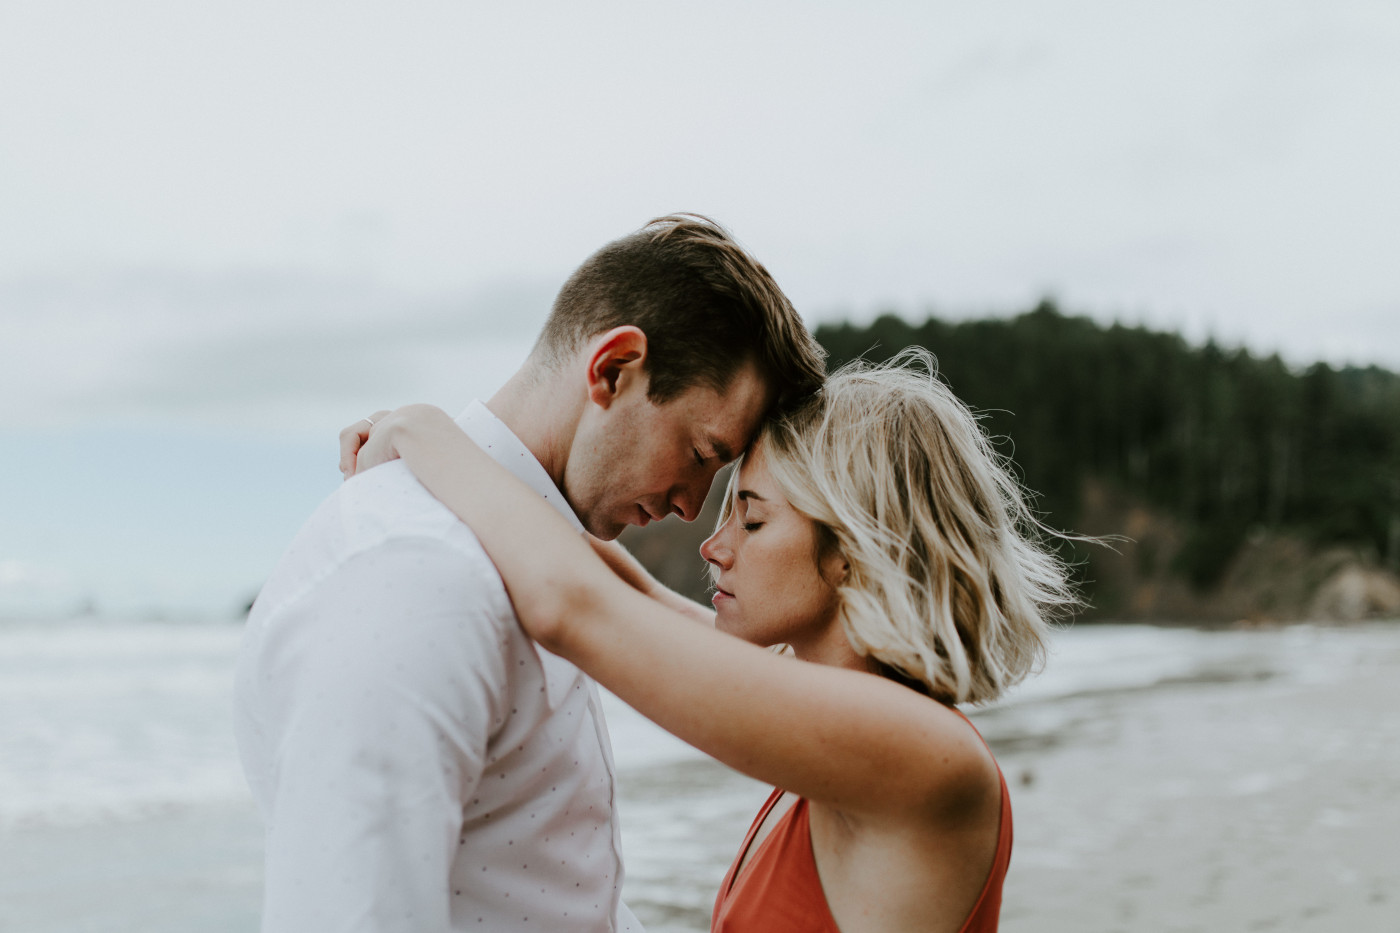 Chelsey and Billy at Cannon Beach. Elopement wedding photography at Cannon Beach by Sienna Plus Josh.